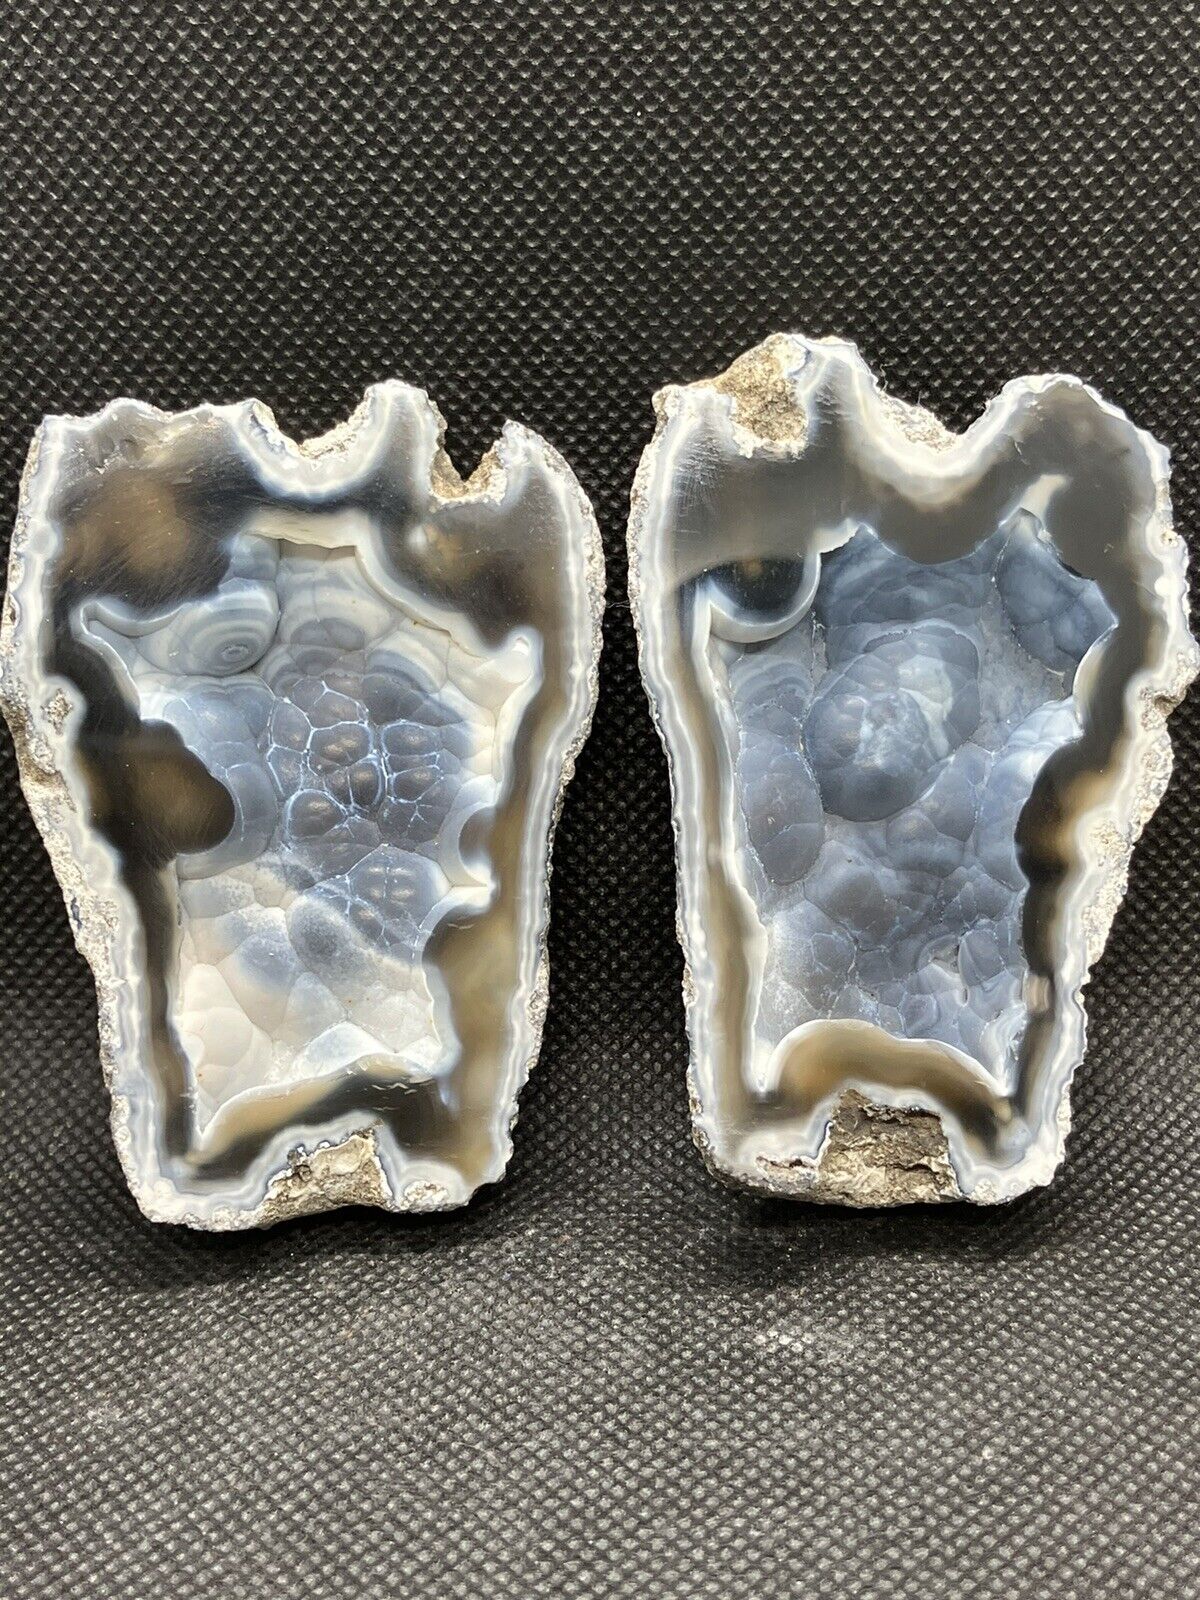 POLISHED AGATIZED  CORAL FROM TAMPA BAY FLORIDA